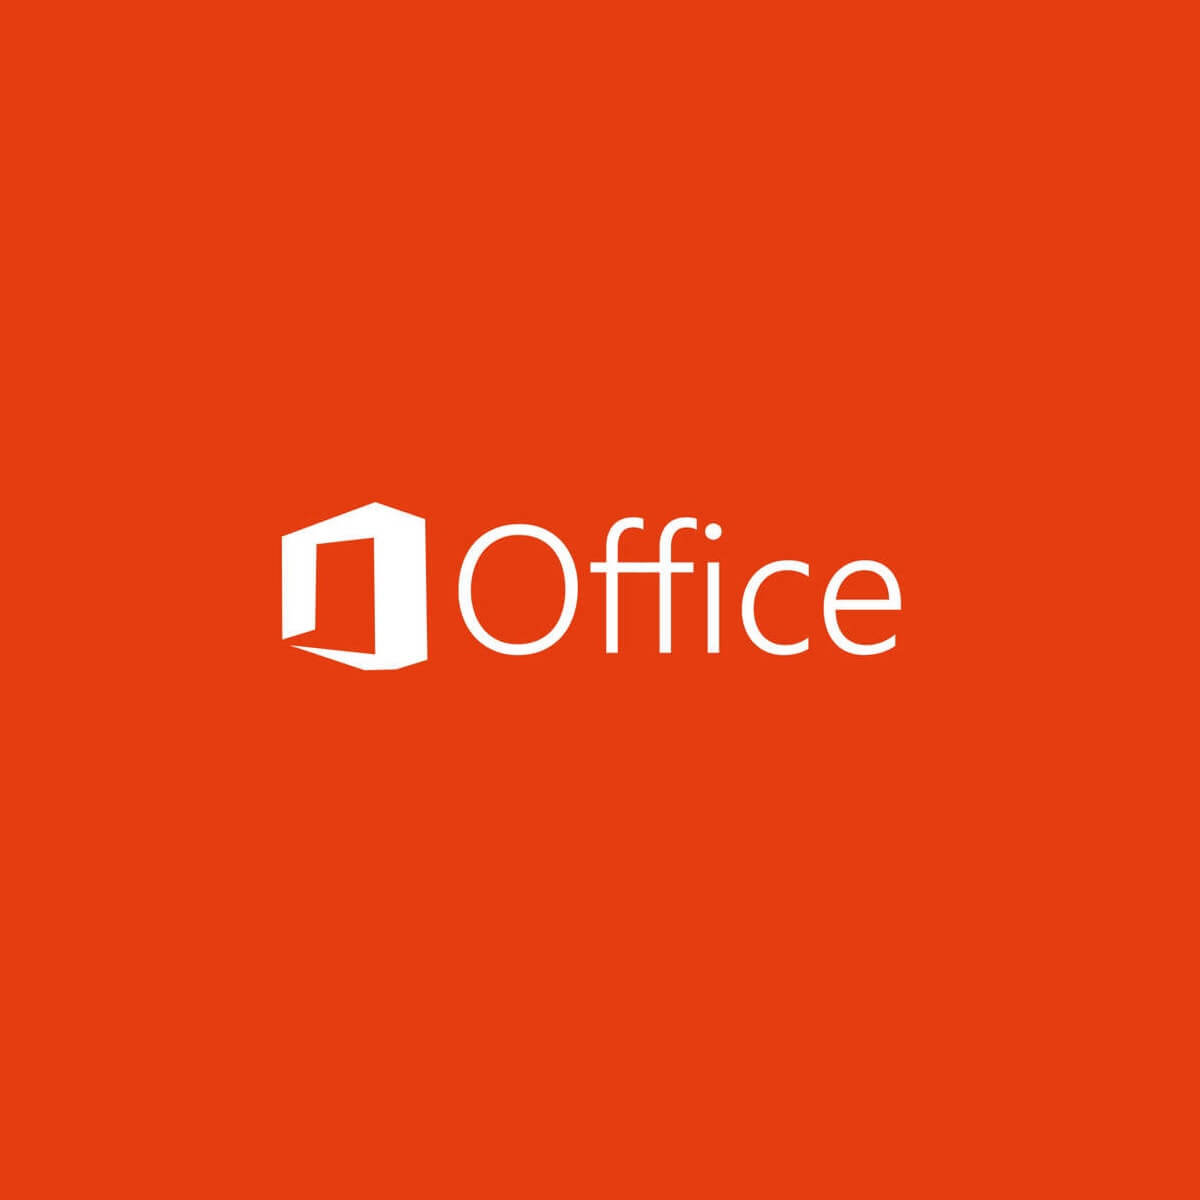 how to extend free trial microsoft office 2013